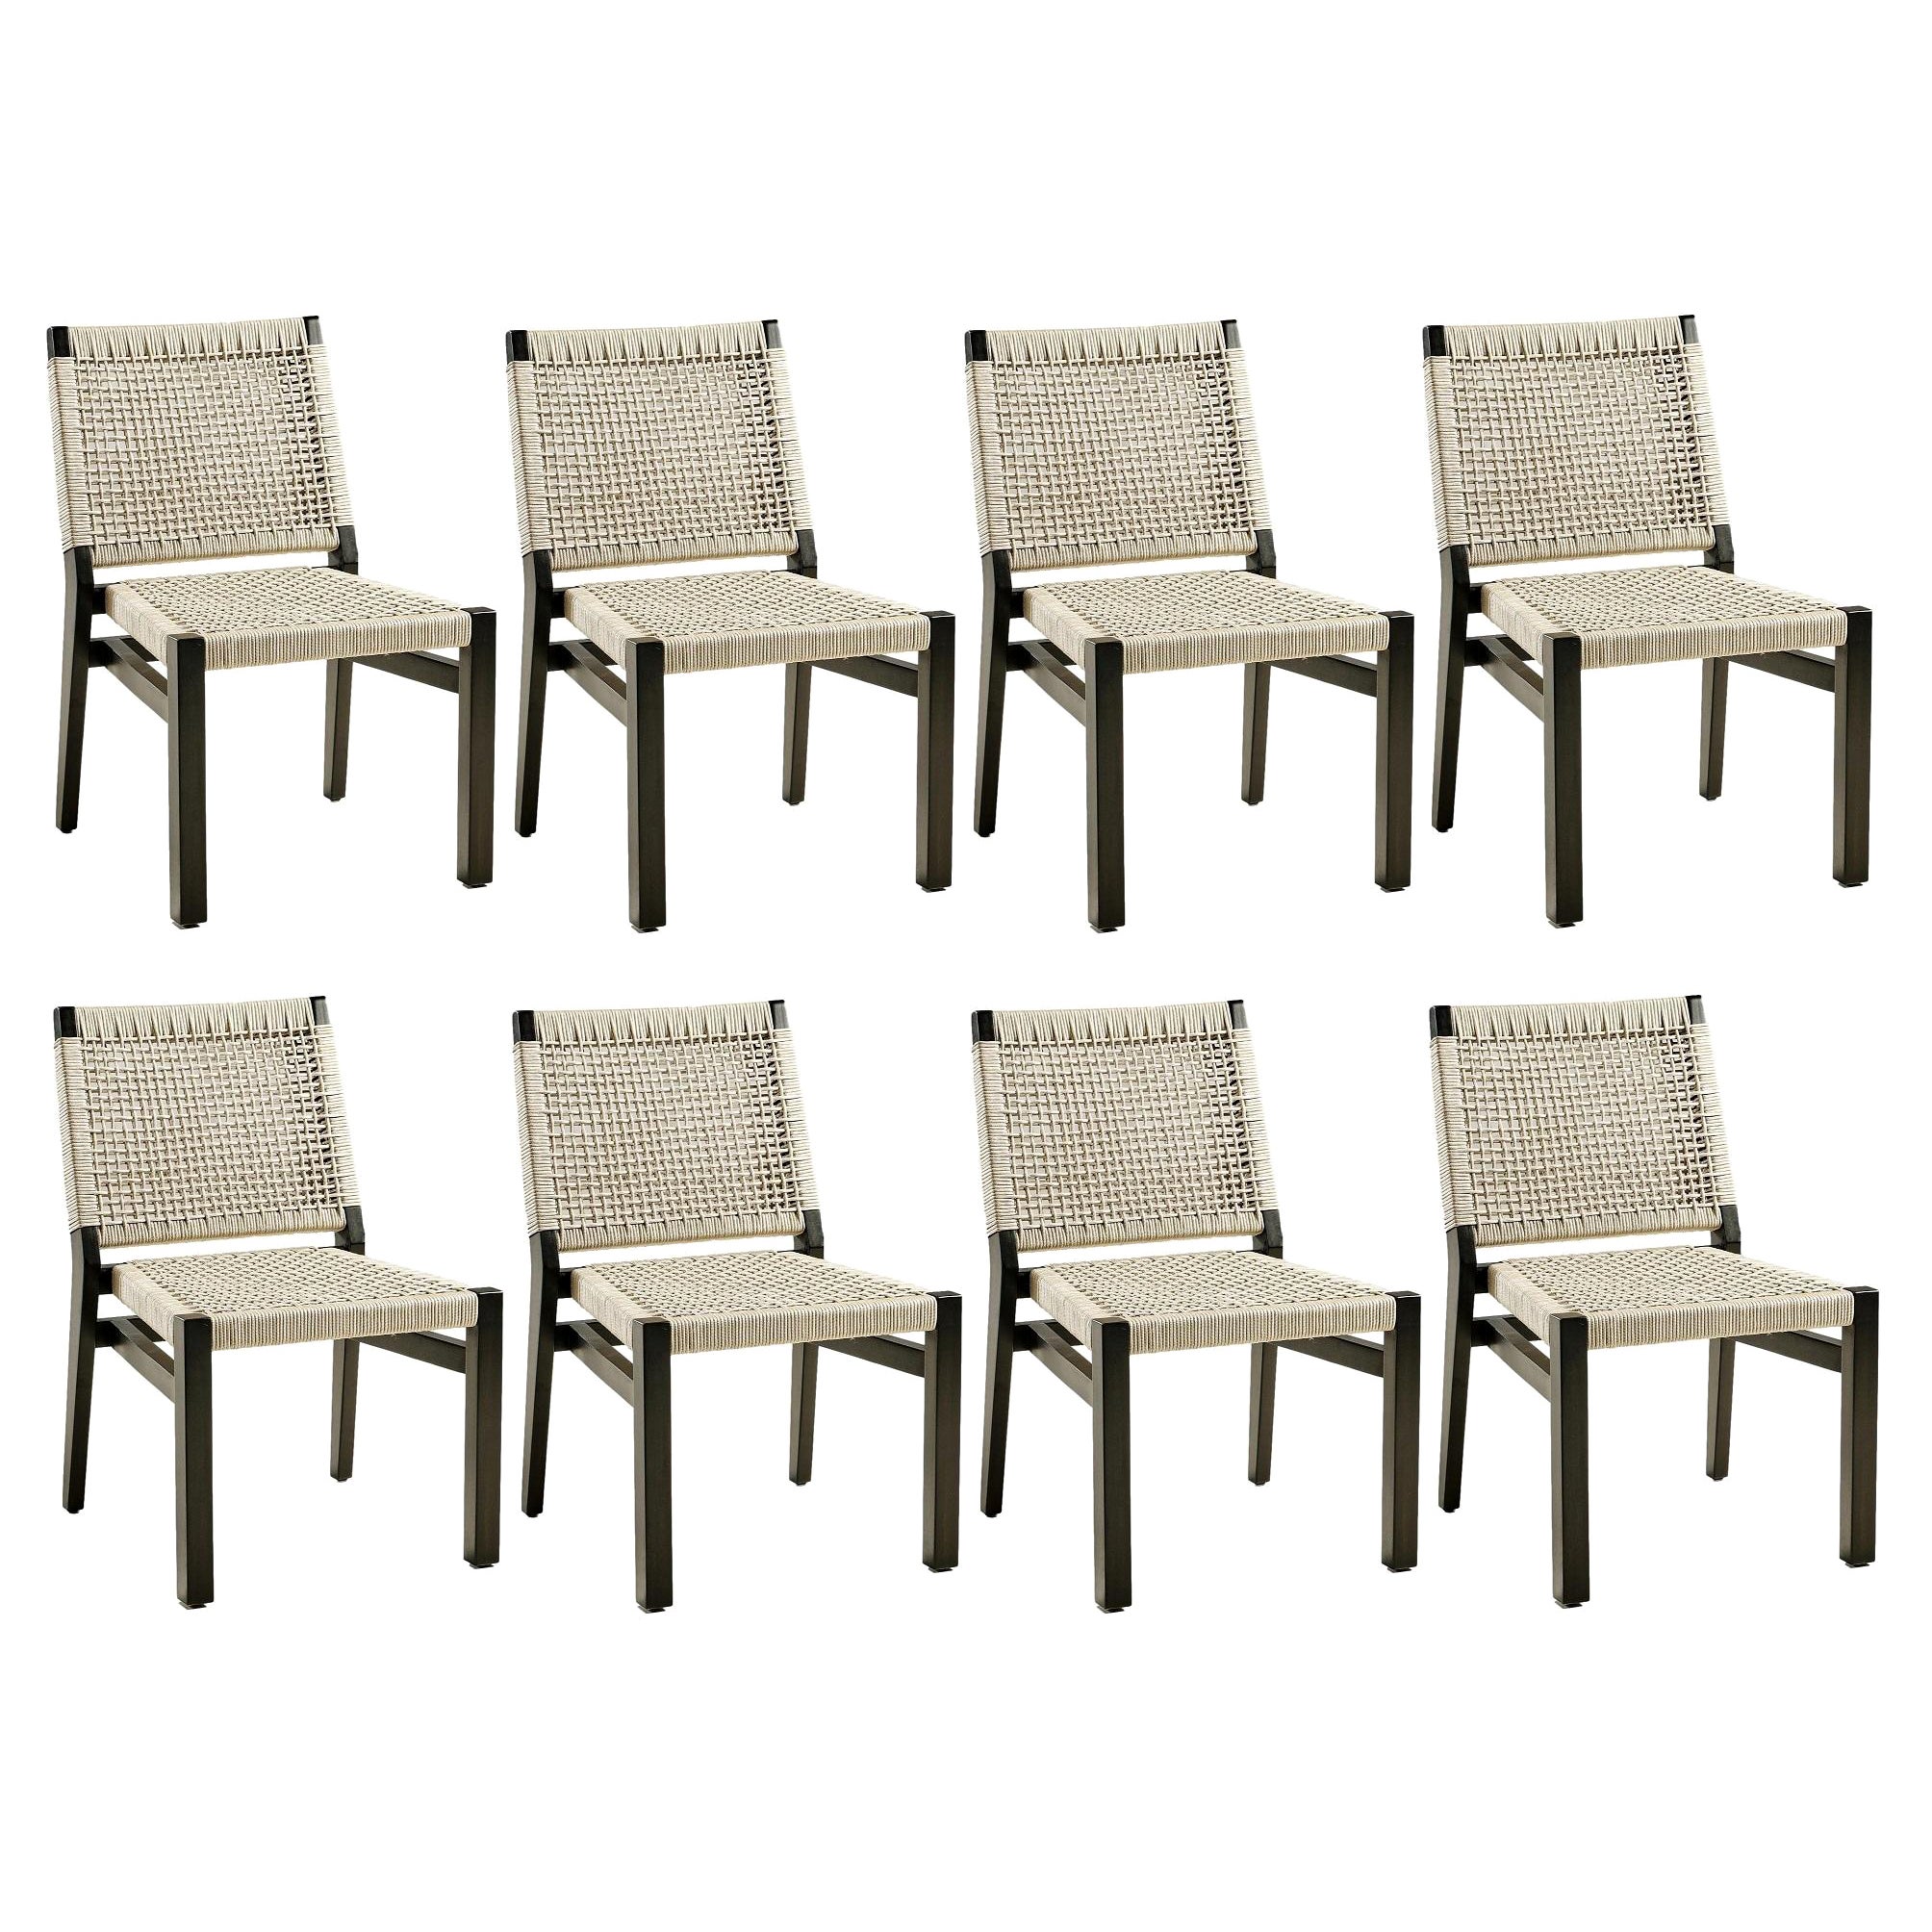 Stackable Outdoor Dining Chairs, Acacia Wood/Rope